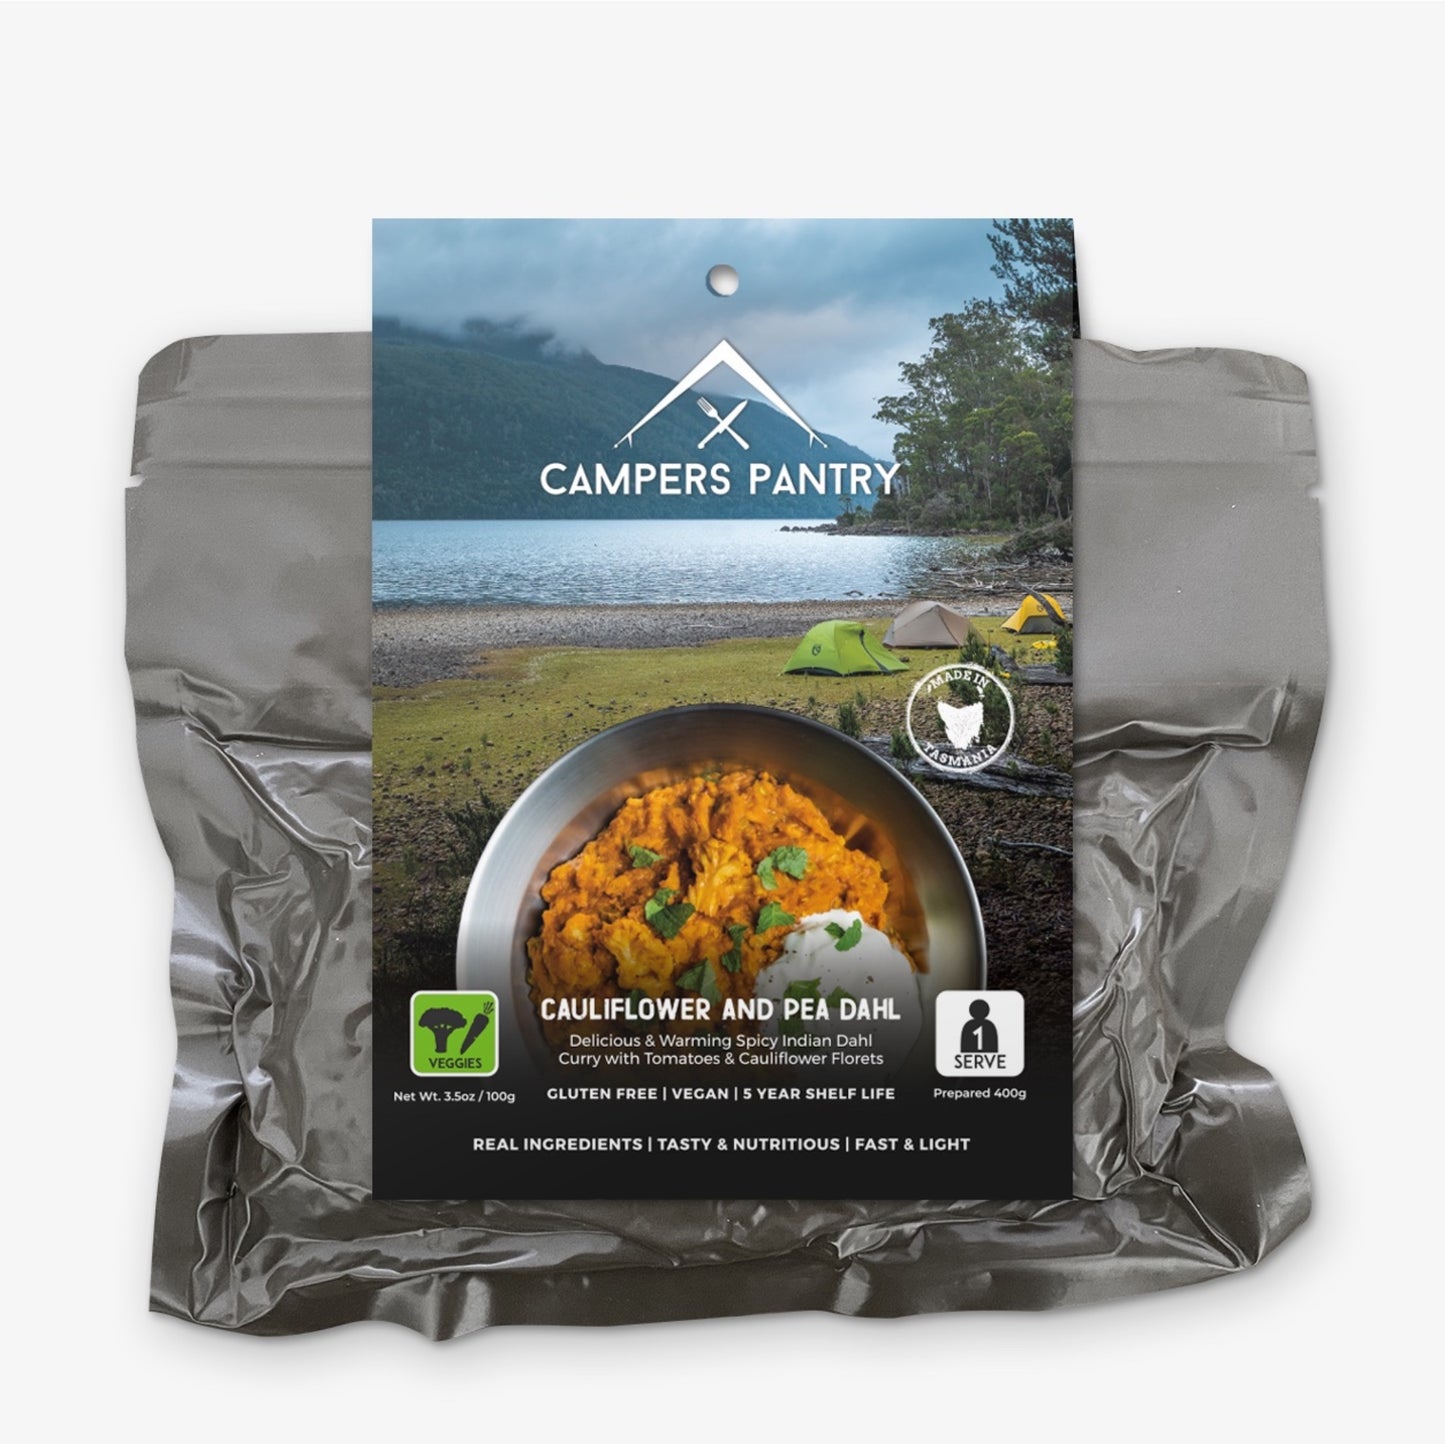 Campers pantry cauliflower and pea dhal Ultralight Hiker